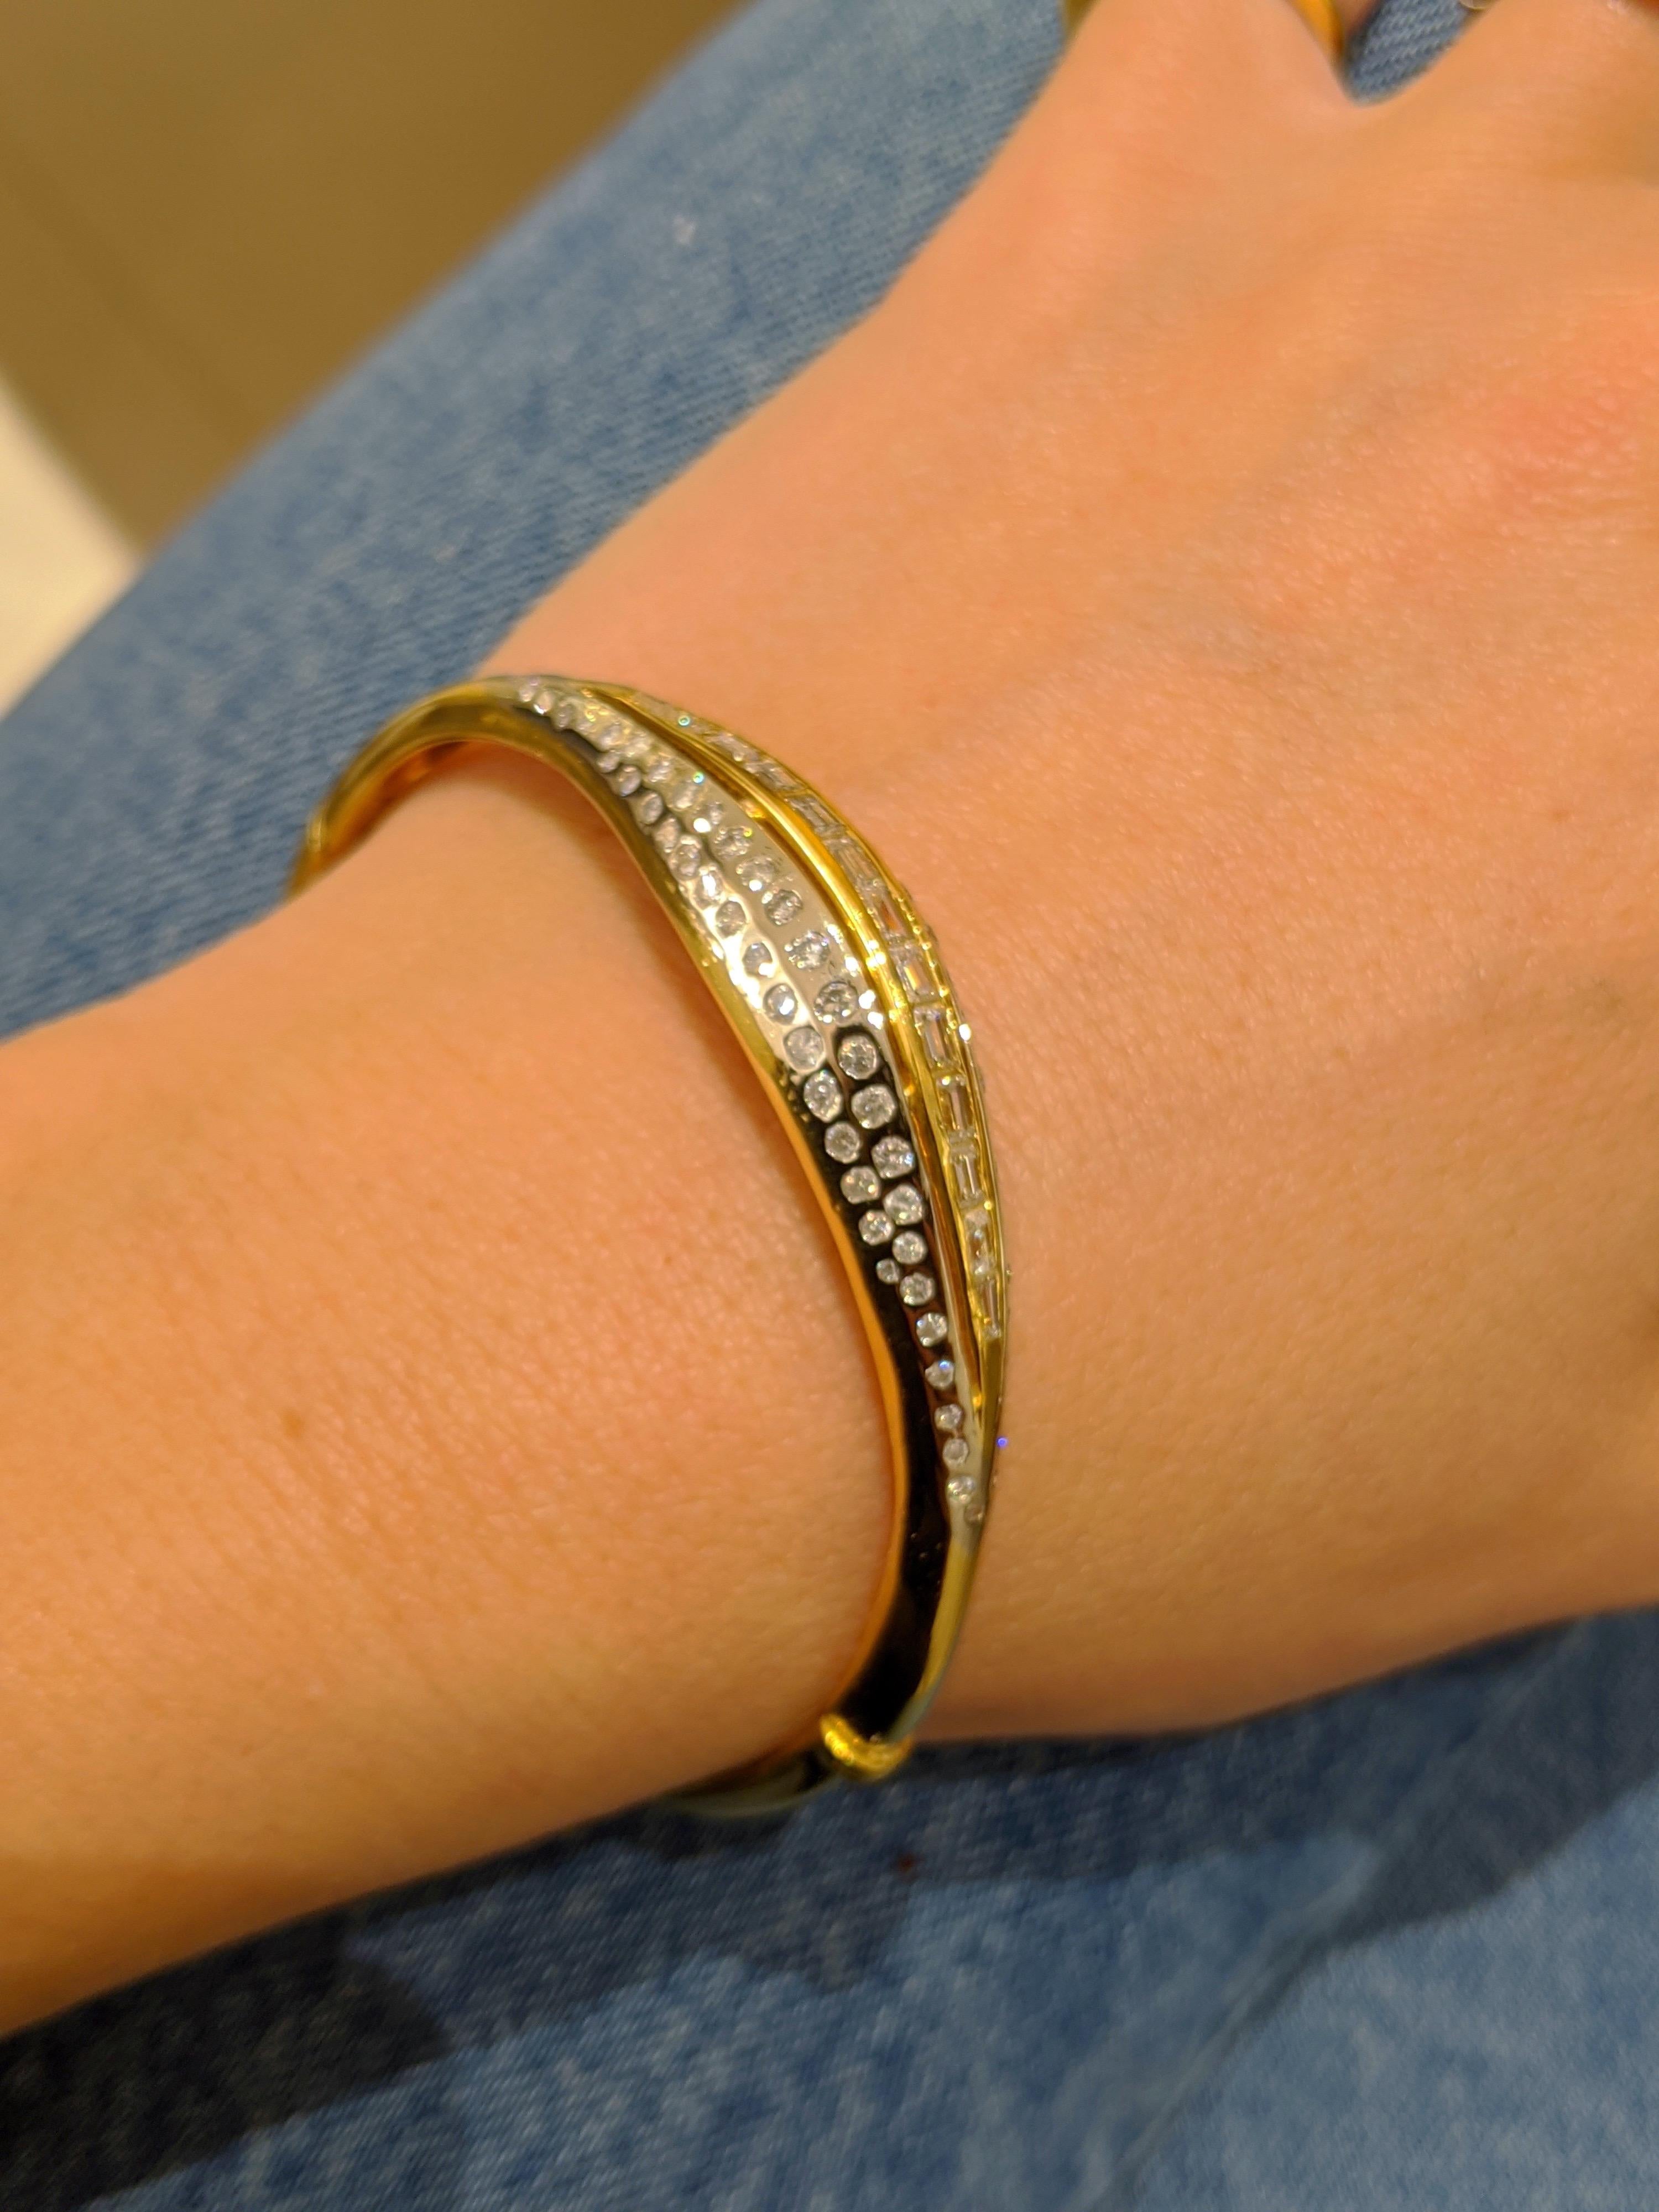 18 KT YG/WG Bangle Bracelet with 3.40 Carat Round and Baguette Diamonds For Sale 4